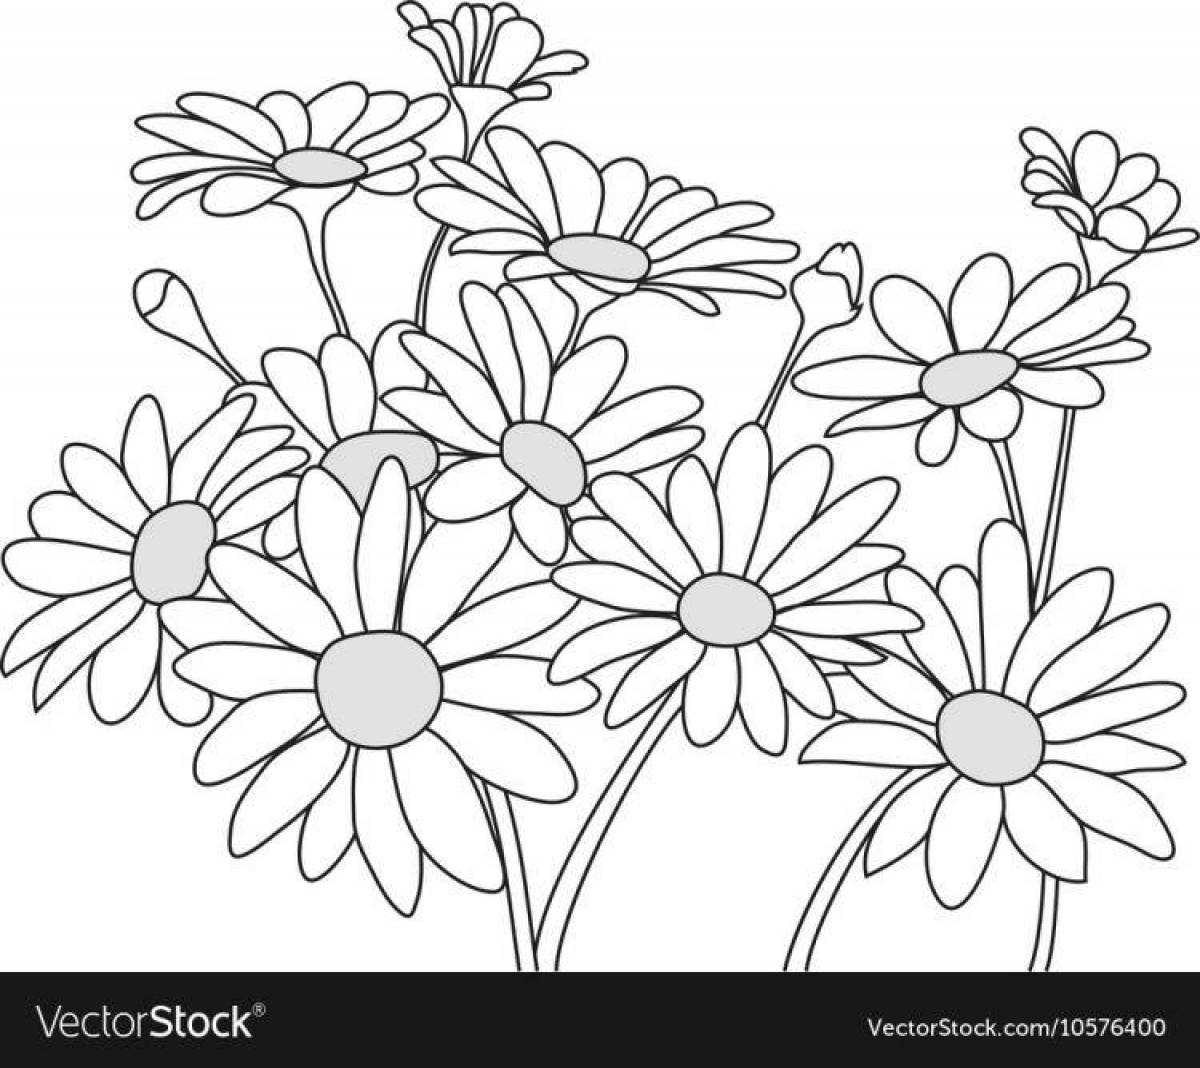 Coloring book cheerful bouquet of daisies